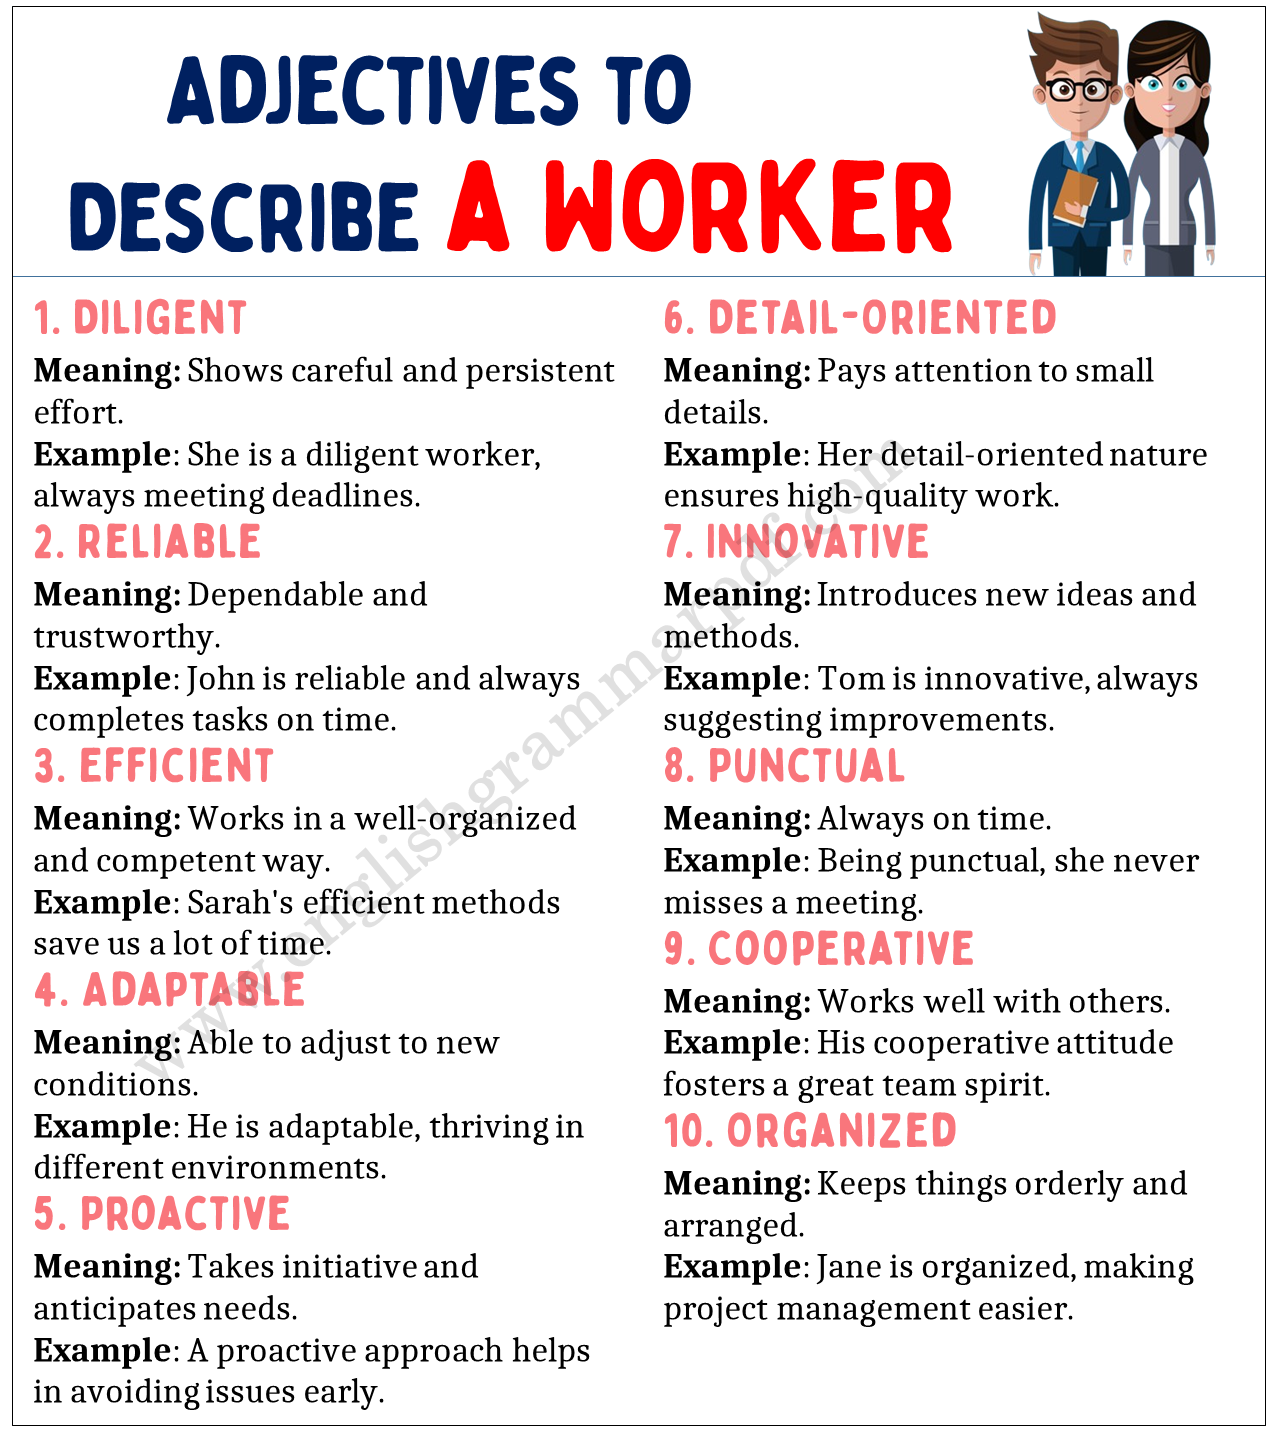 Adjectives to Describe a Worker